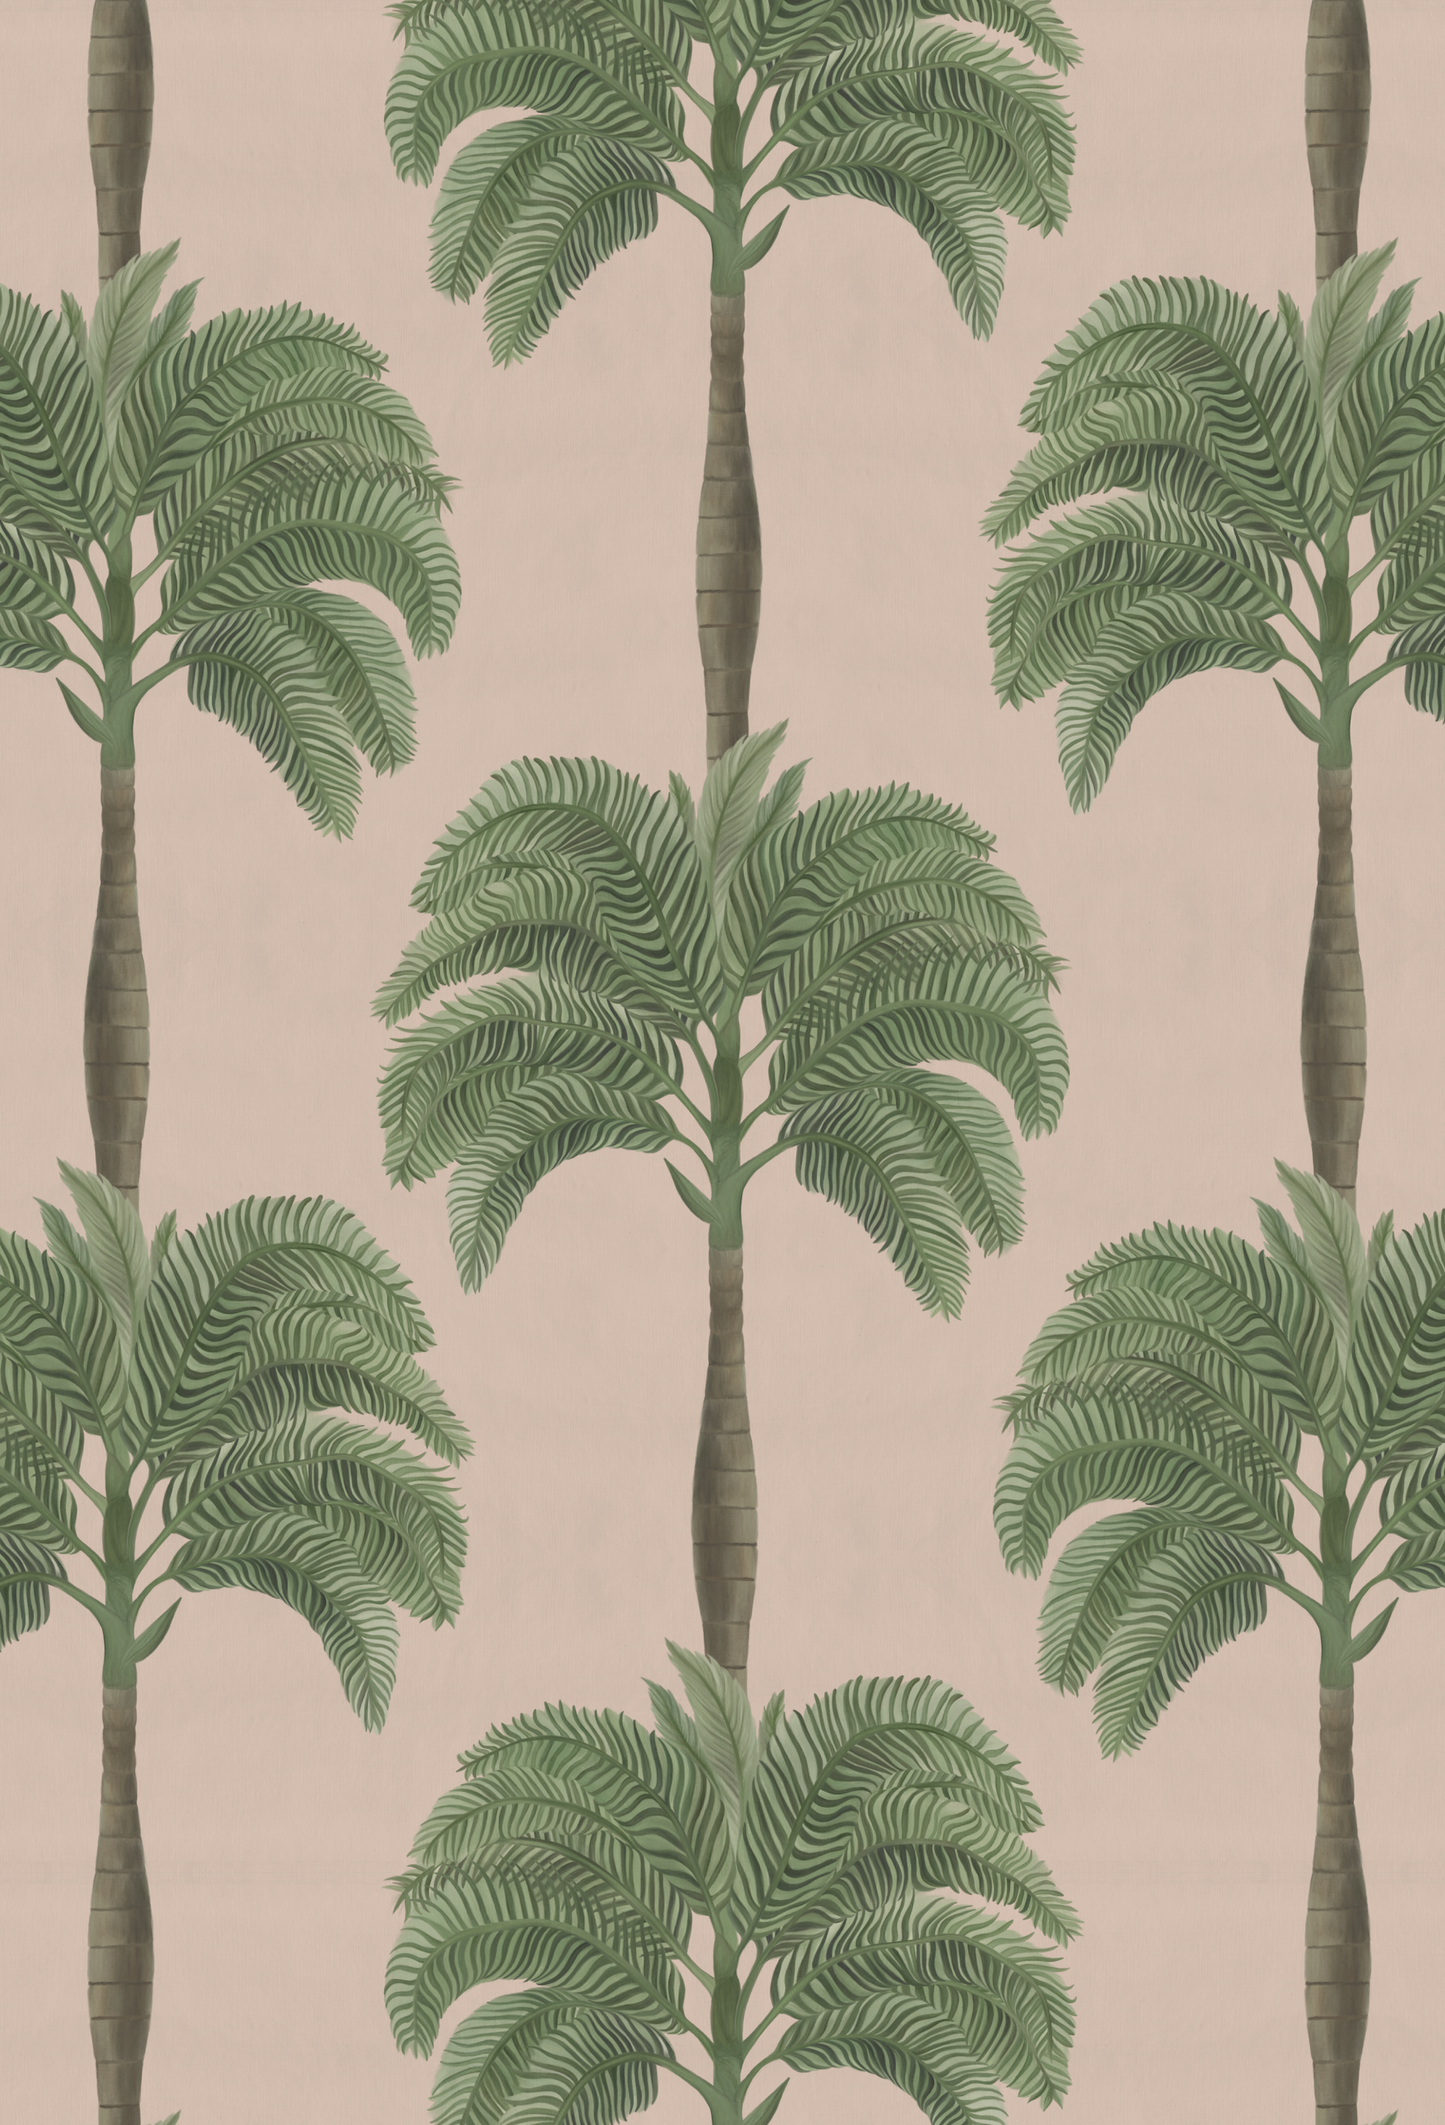 Palm tree striped wallpaper of Palma Collection in pink 'Flamingo' from Deus ex Gardenia.